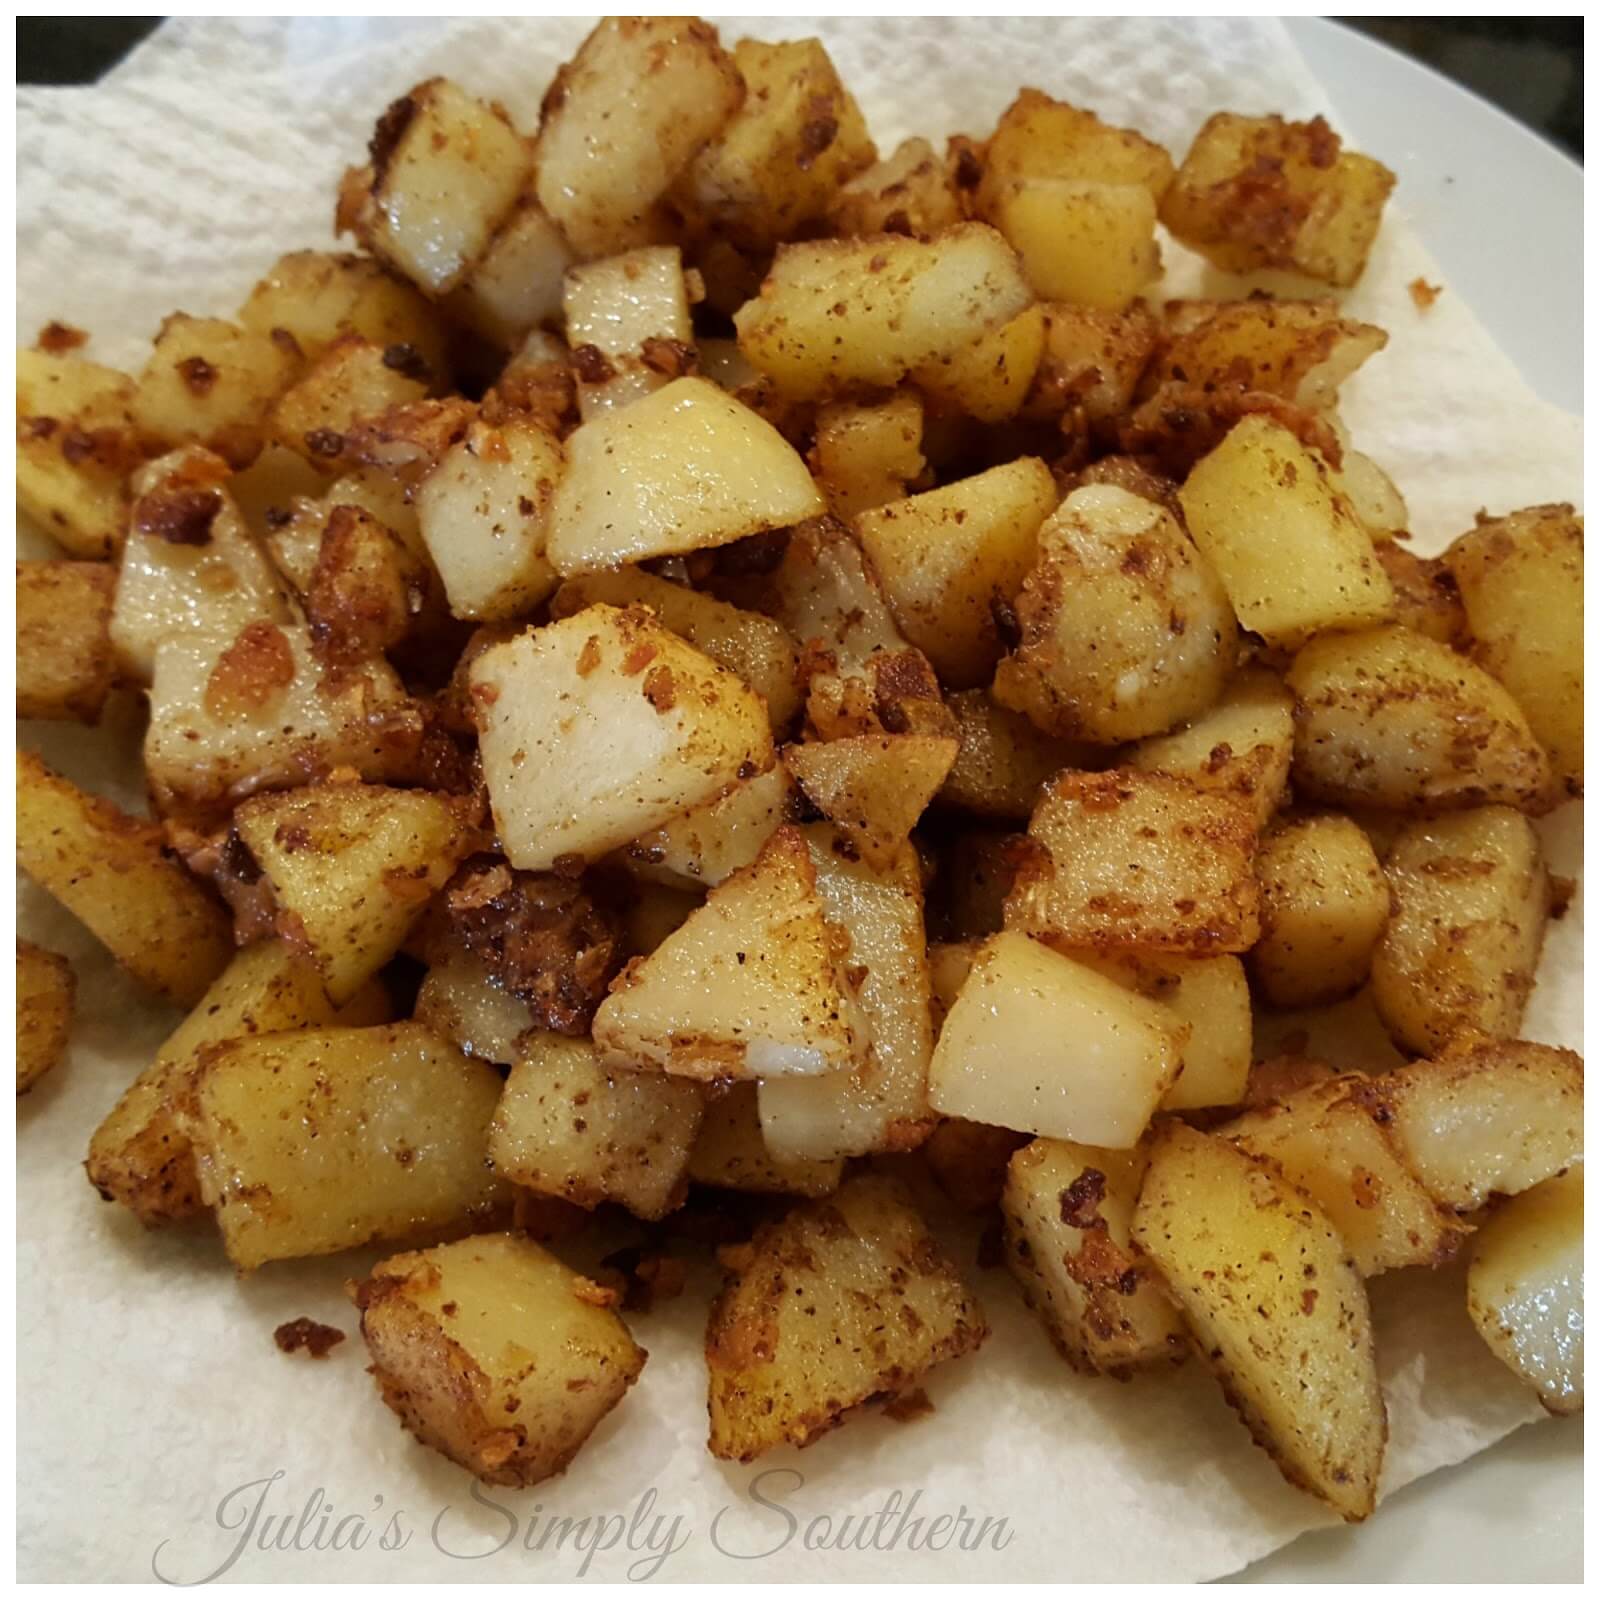 Southern Style Pan Fried Potatoes in a cast iron skillet - Julia's Simply Southern